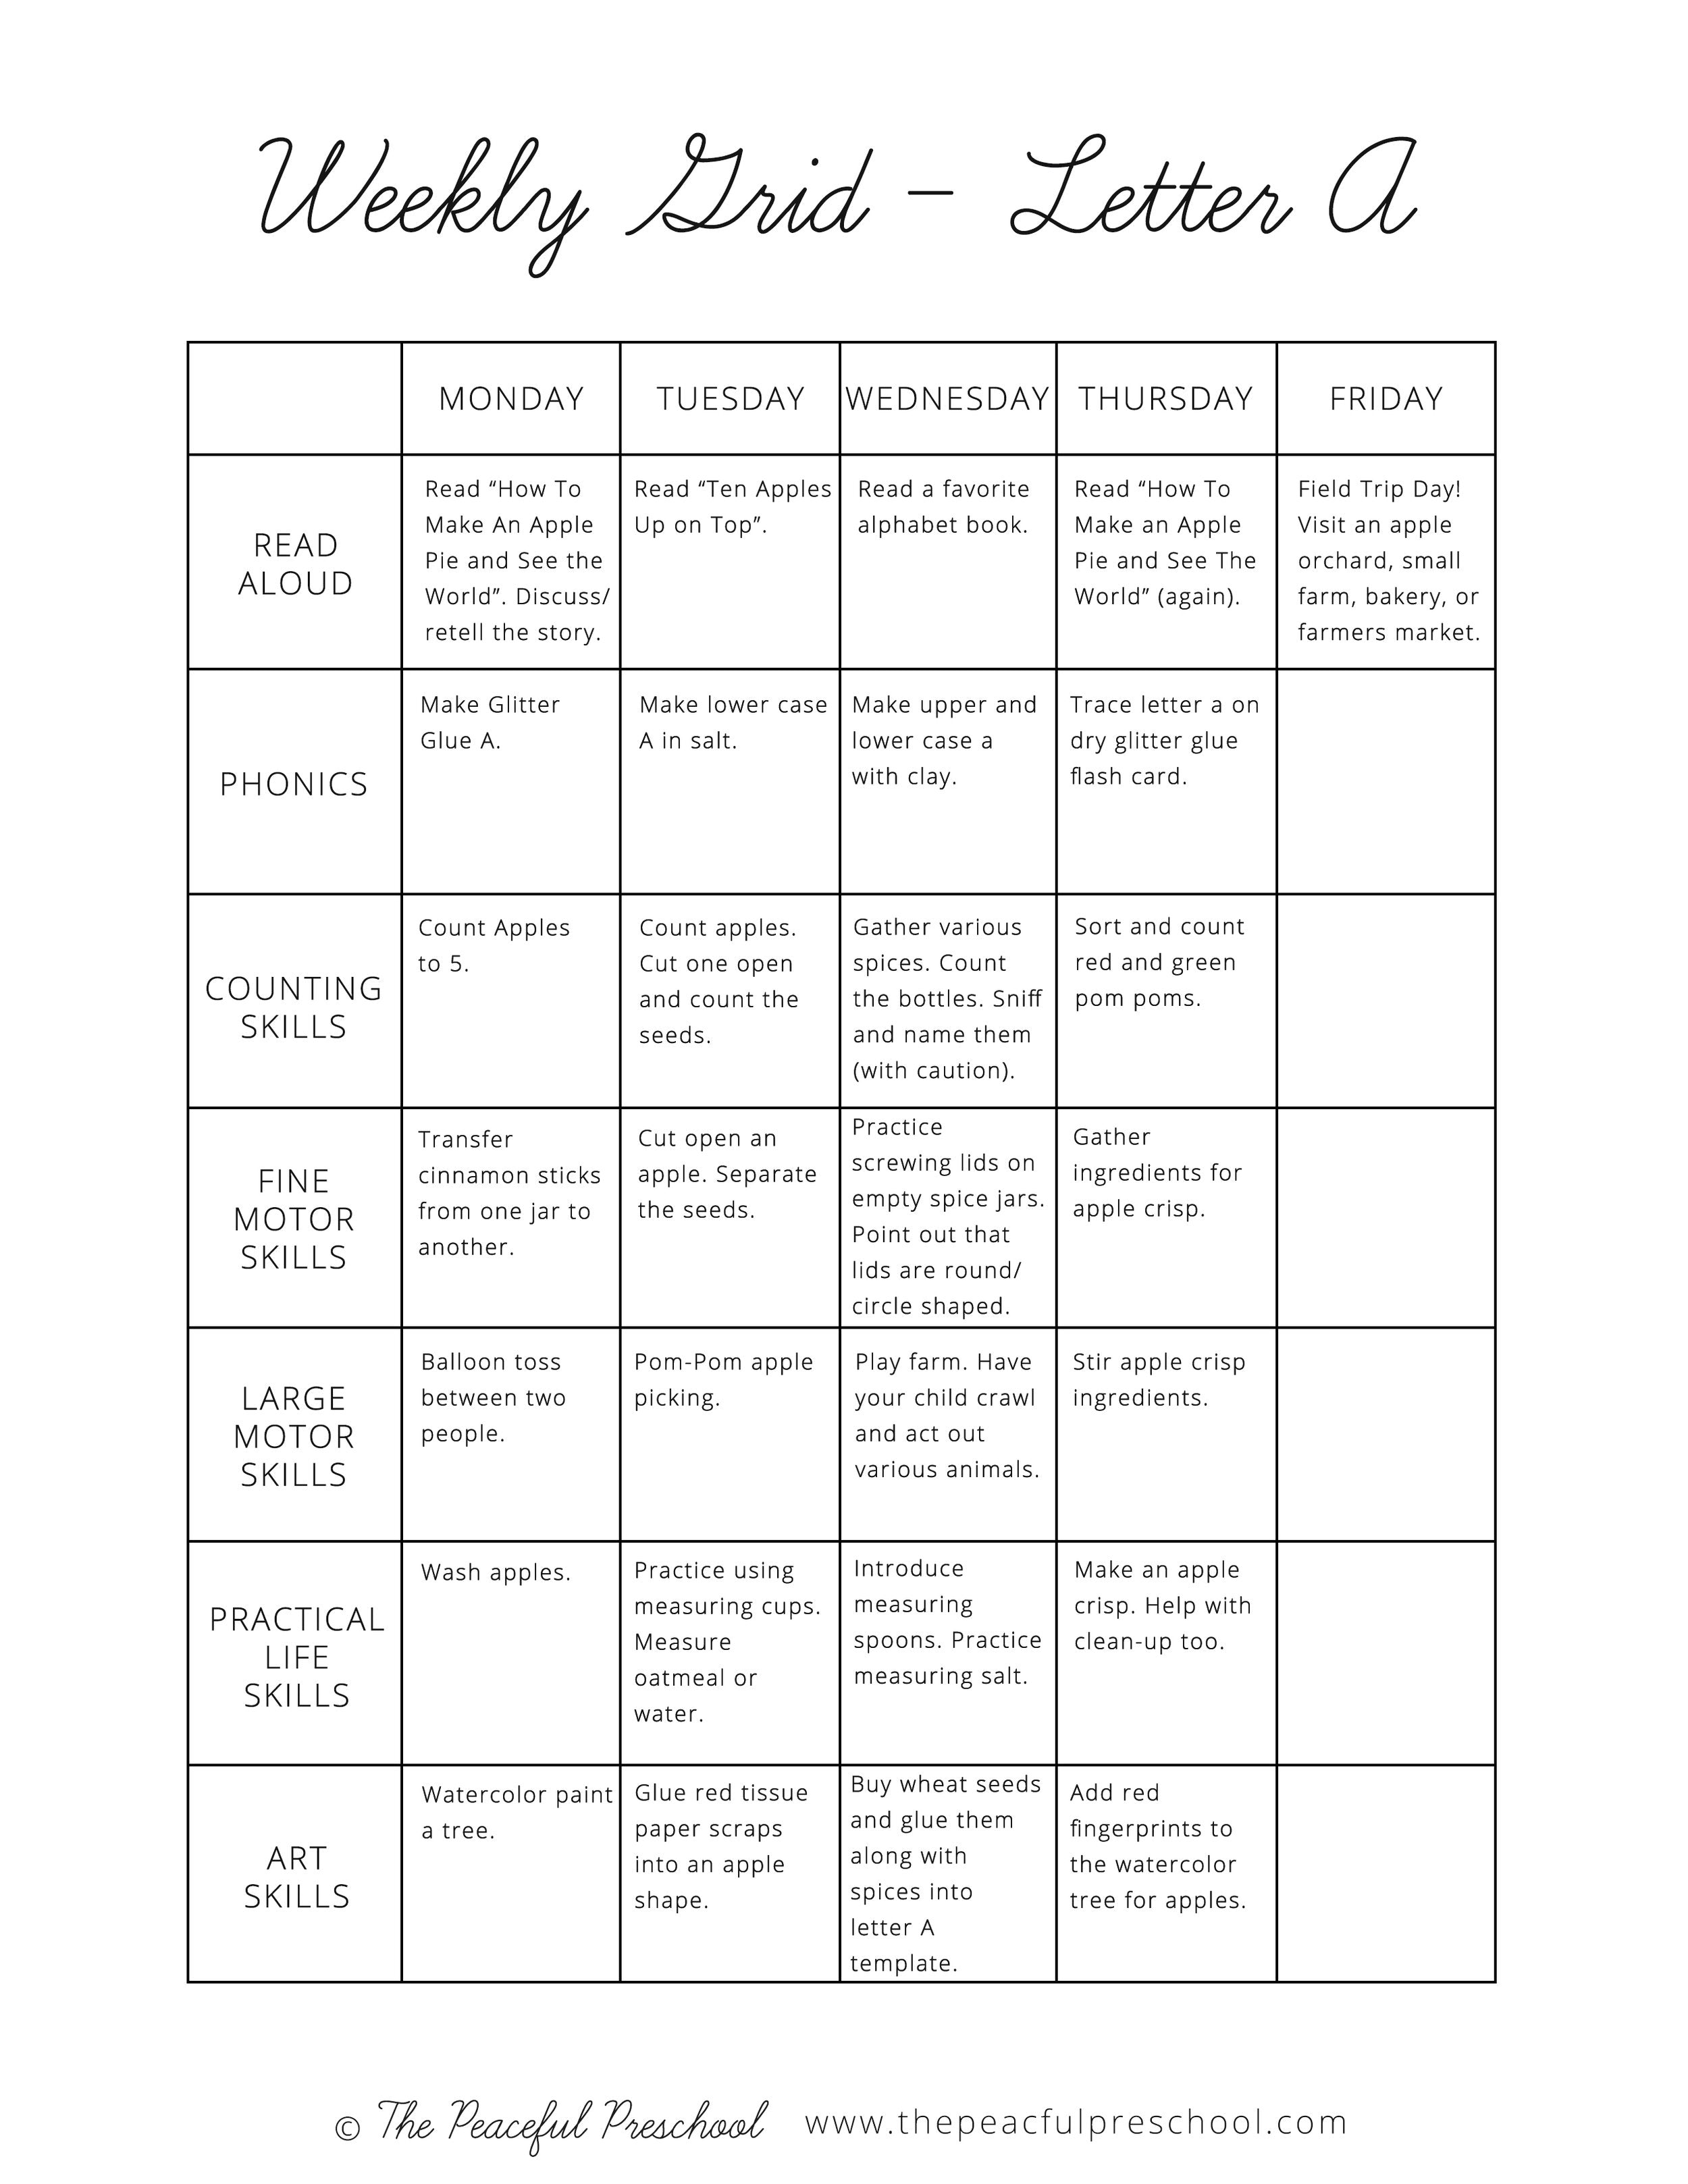 A weekly homeschool schedule grid sample for a week focused on the letter 'A'.